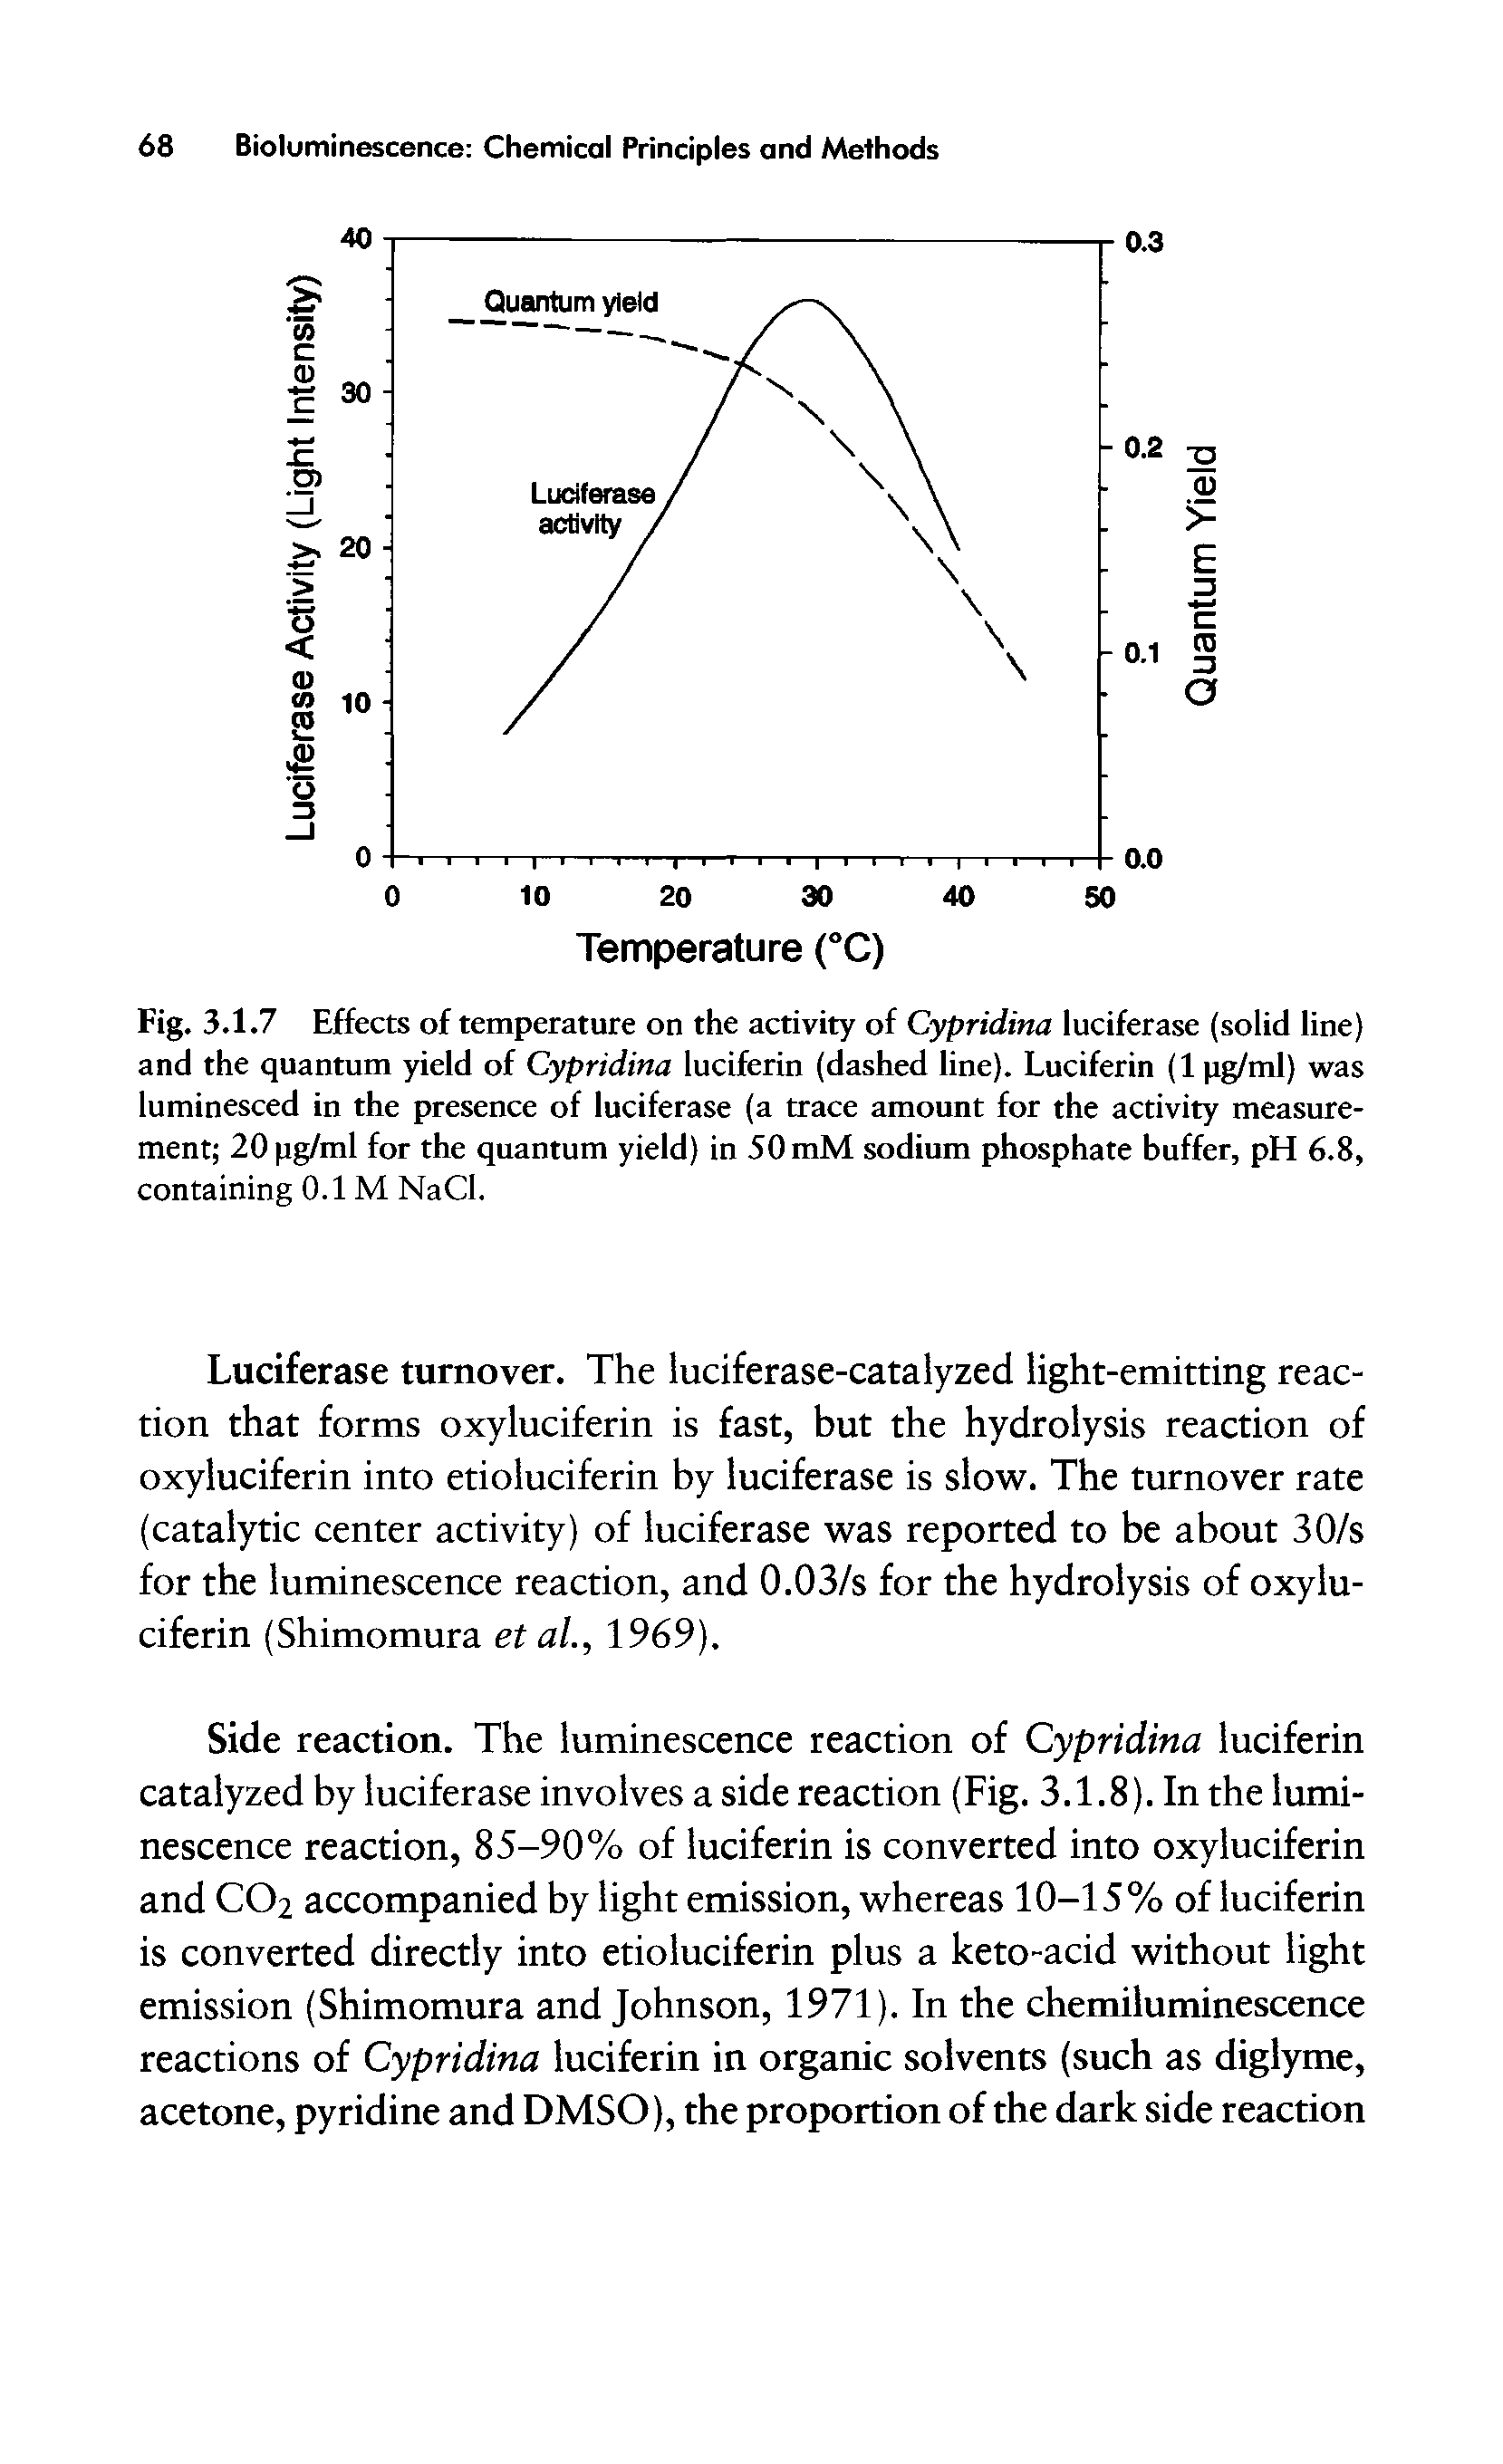 Fig. 3.1.7 Effects of temperature on the activity of Cypridina luciferase (solid line) and the quantum yield of Cypridina luciferin (dashed line). Luciferin (1 pg/ml) was luminesced in the presence of luciferase (a trace amount for the activity measurement 20 pg/ml for the quantum yield) in 50 mM sodium phosphate buffer, pH 6.8, containing 0.1 M NaCl.